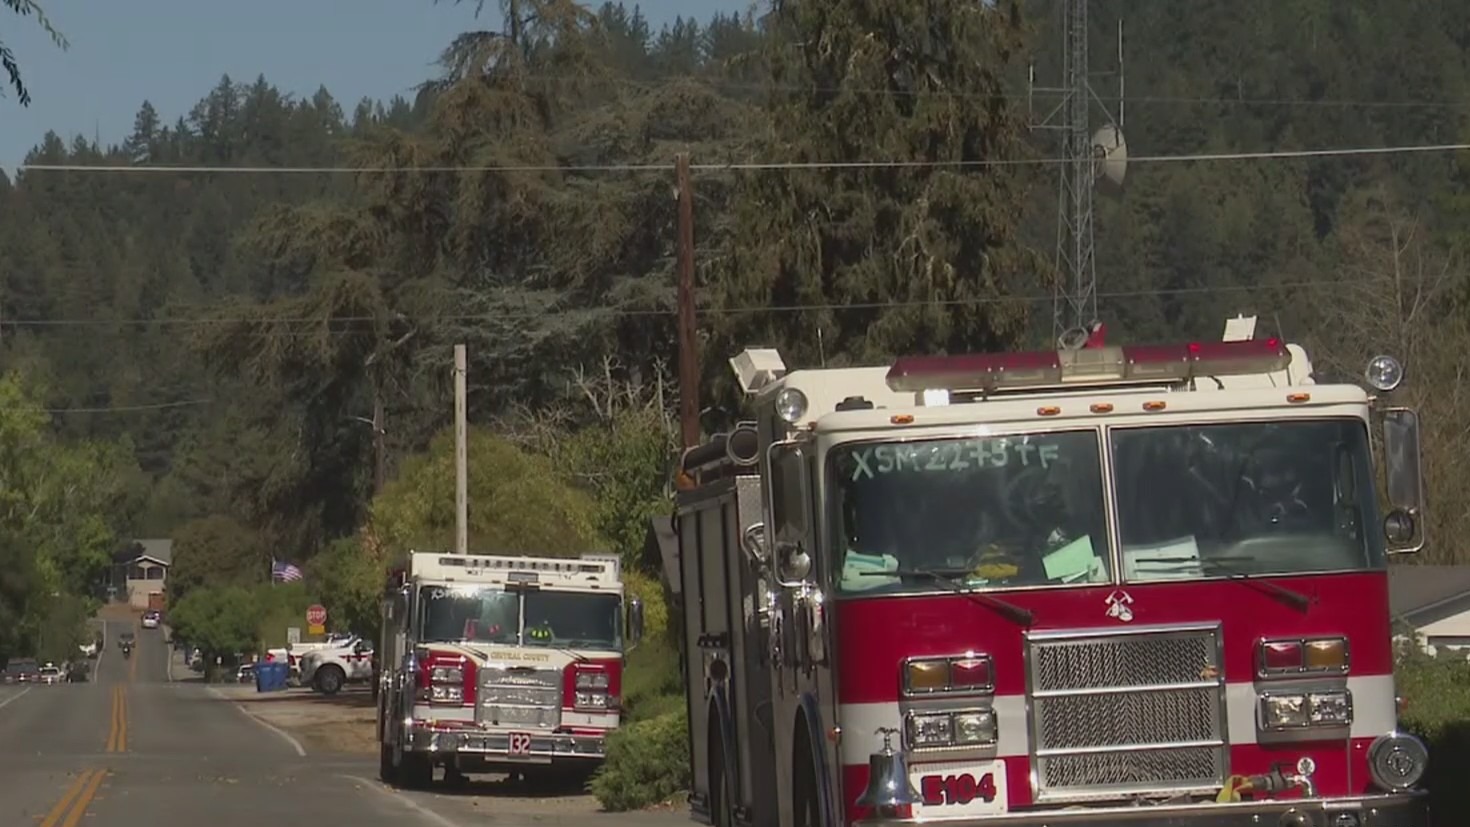 Cal Fire crews in the Santa Cruz Mountains during a Red Flag Warning on October 11, 2021. (CBS)